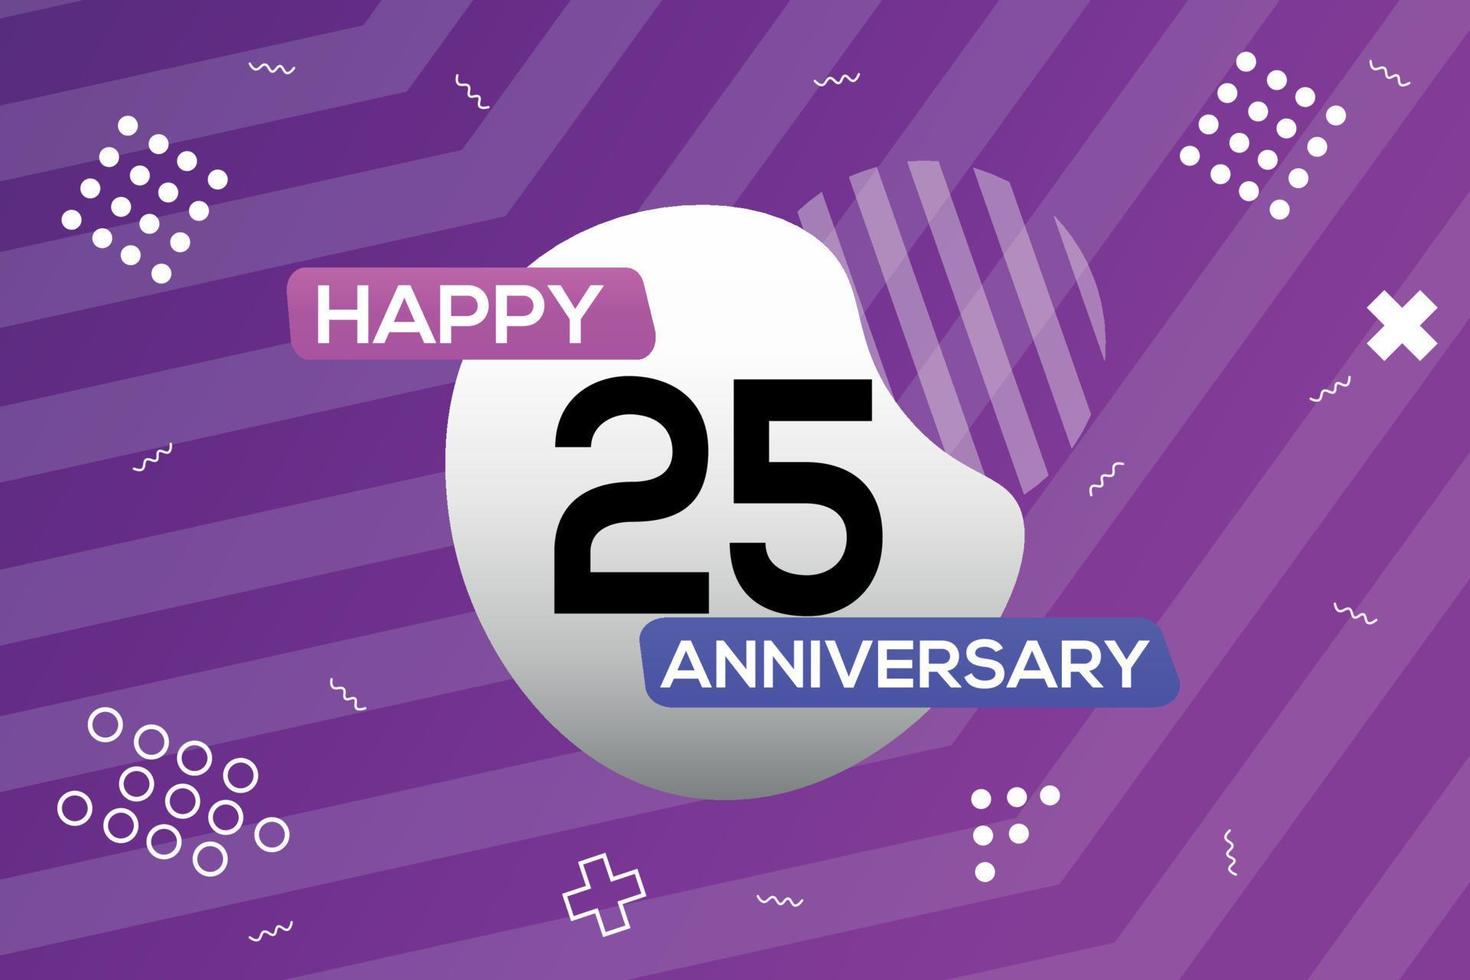 25th year anniversary logo vector design anniversary celebration with colorful geometric shapes abstract illustration